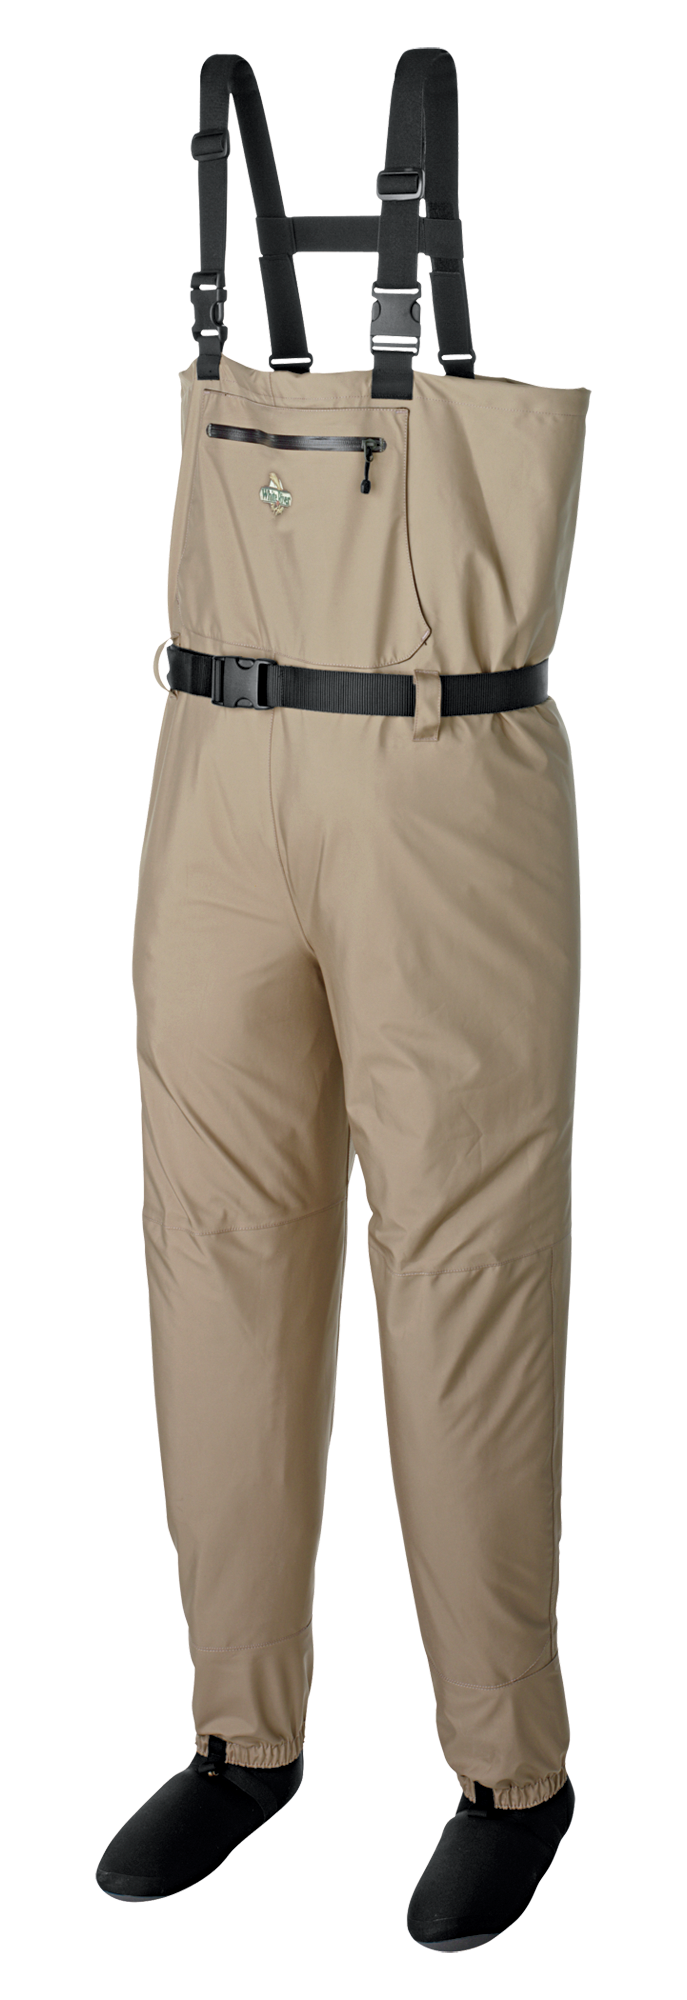 White River Fly Shop Classic Chest-High Stocking-Foot Breathable Waders for  Men